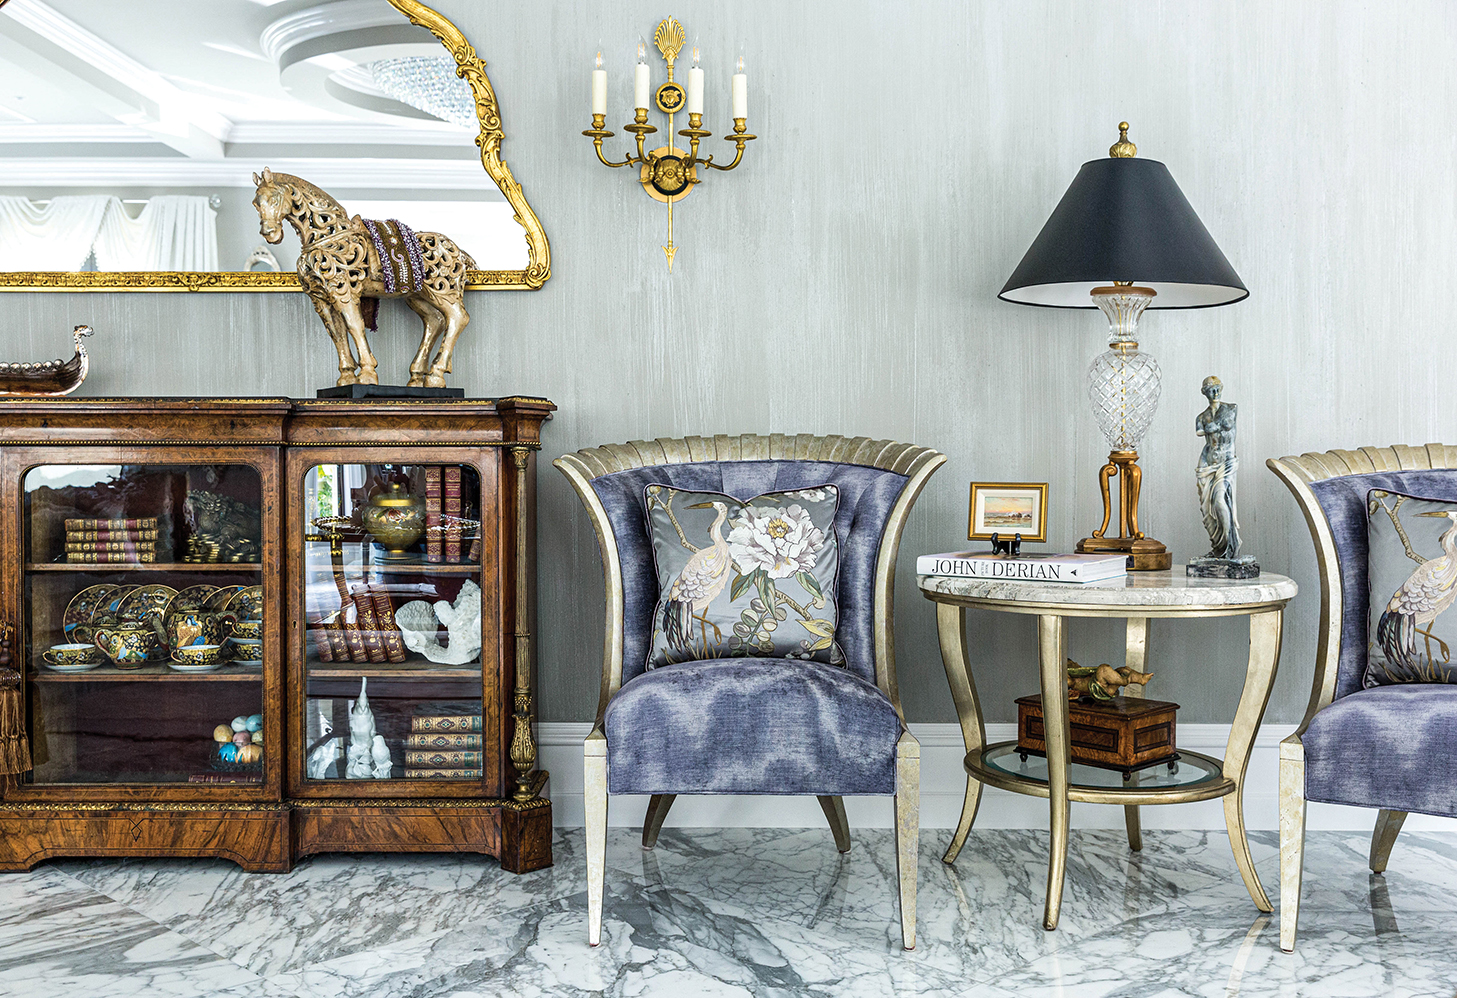 Arm chair with shades of blue and ornate furnishings